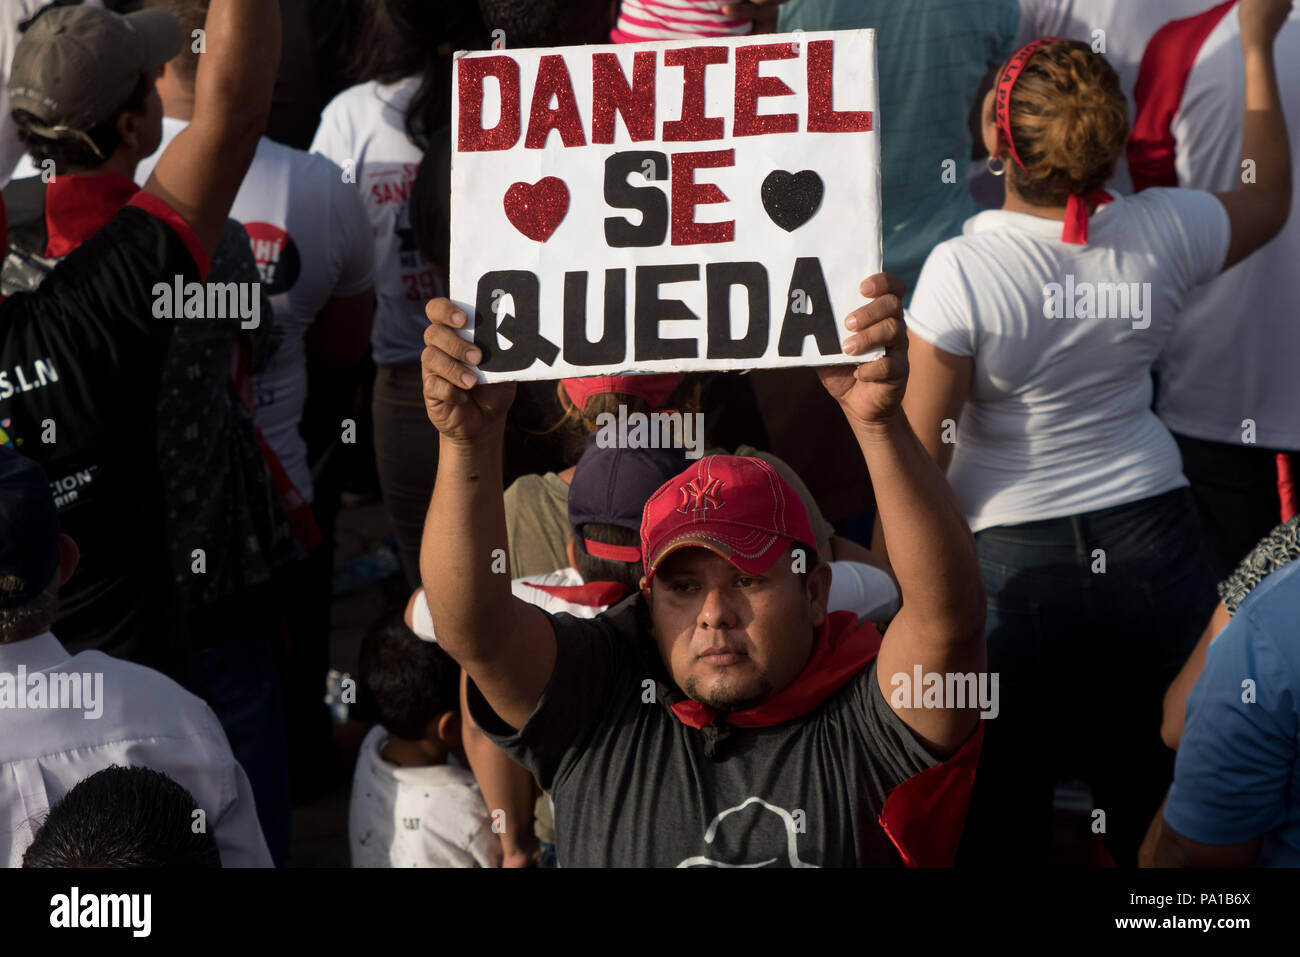 Managua, Nicaragua. 19th July, 2018. A supporter of the Sandinista National Liberation Front (FSLN) holding a sign with the text 'Daniel stays' during an event in conmemoration of the 39th anniversary of the Sandinista revolution. The Nicaraguan president has accused the country's Catholic church of being part of an attempted coup against his government. According to Ortega, the country's Catholic bishops aren't intermediaries in the political crisis, but rather part of a putschist conspiracy. Credit: Carlos Herrera/dpa | usage worldwide/dpa/Alamy Live News Stock Photo